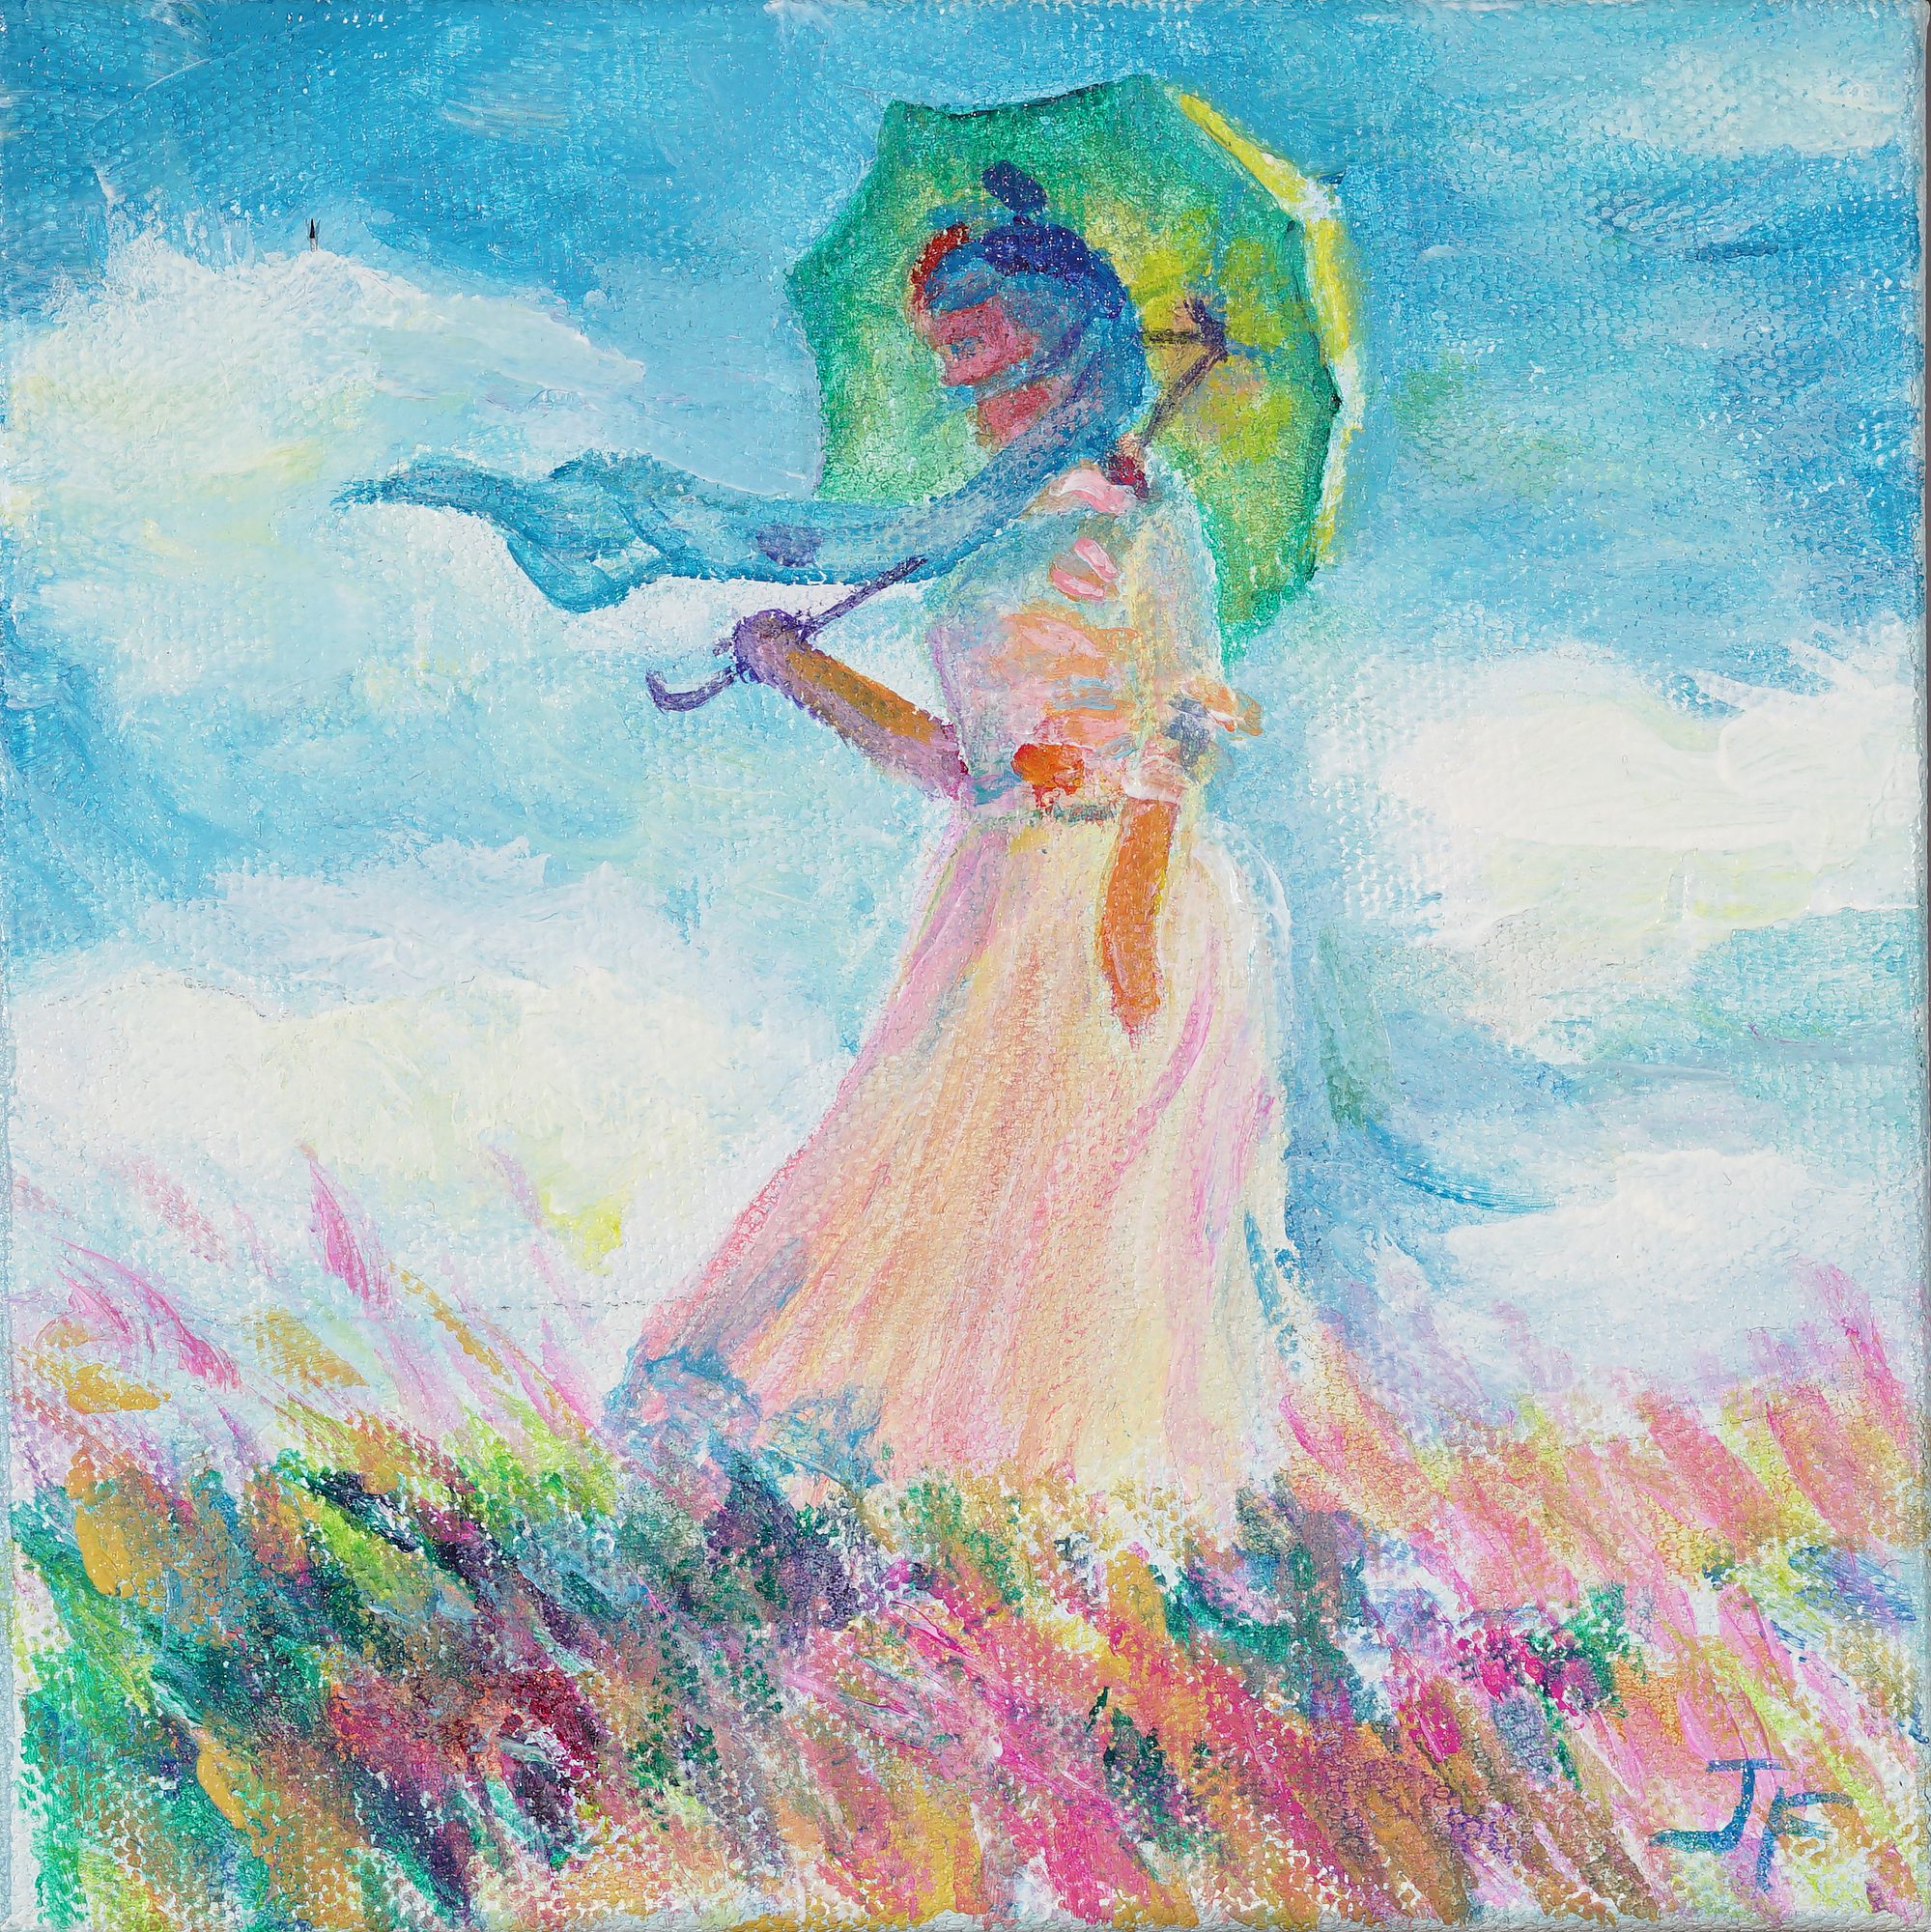 Jeanette Foreman, Woman with a Parasol, Facing Left, like C. Monet